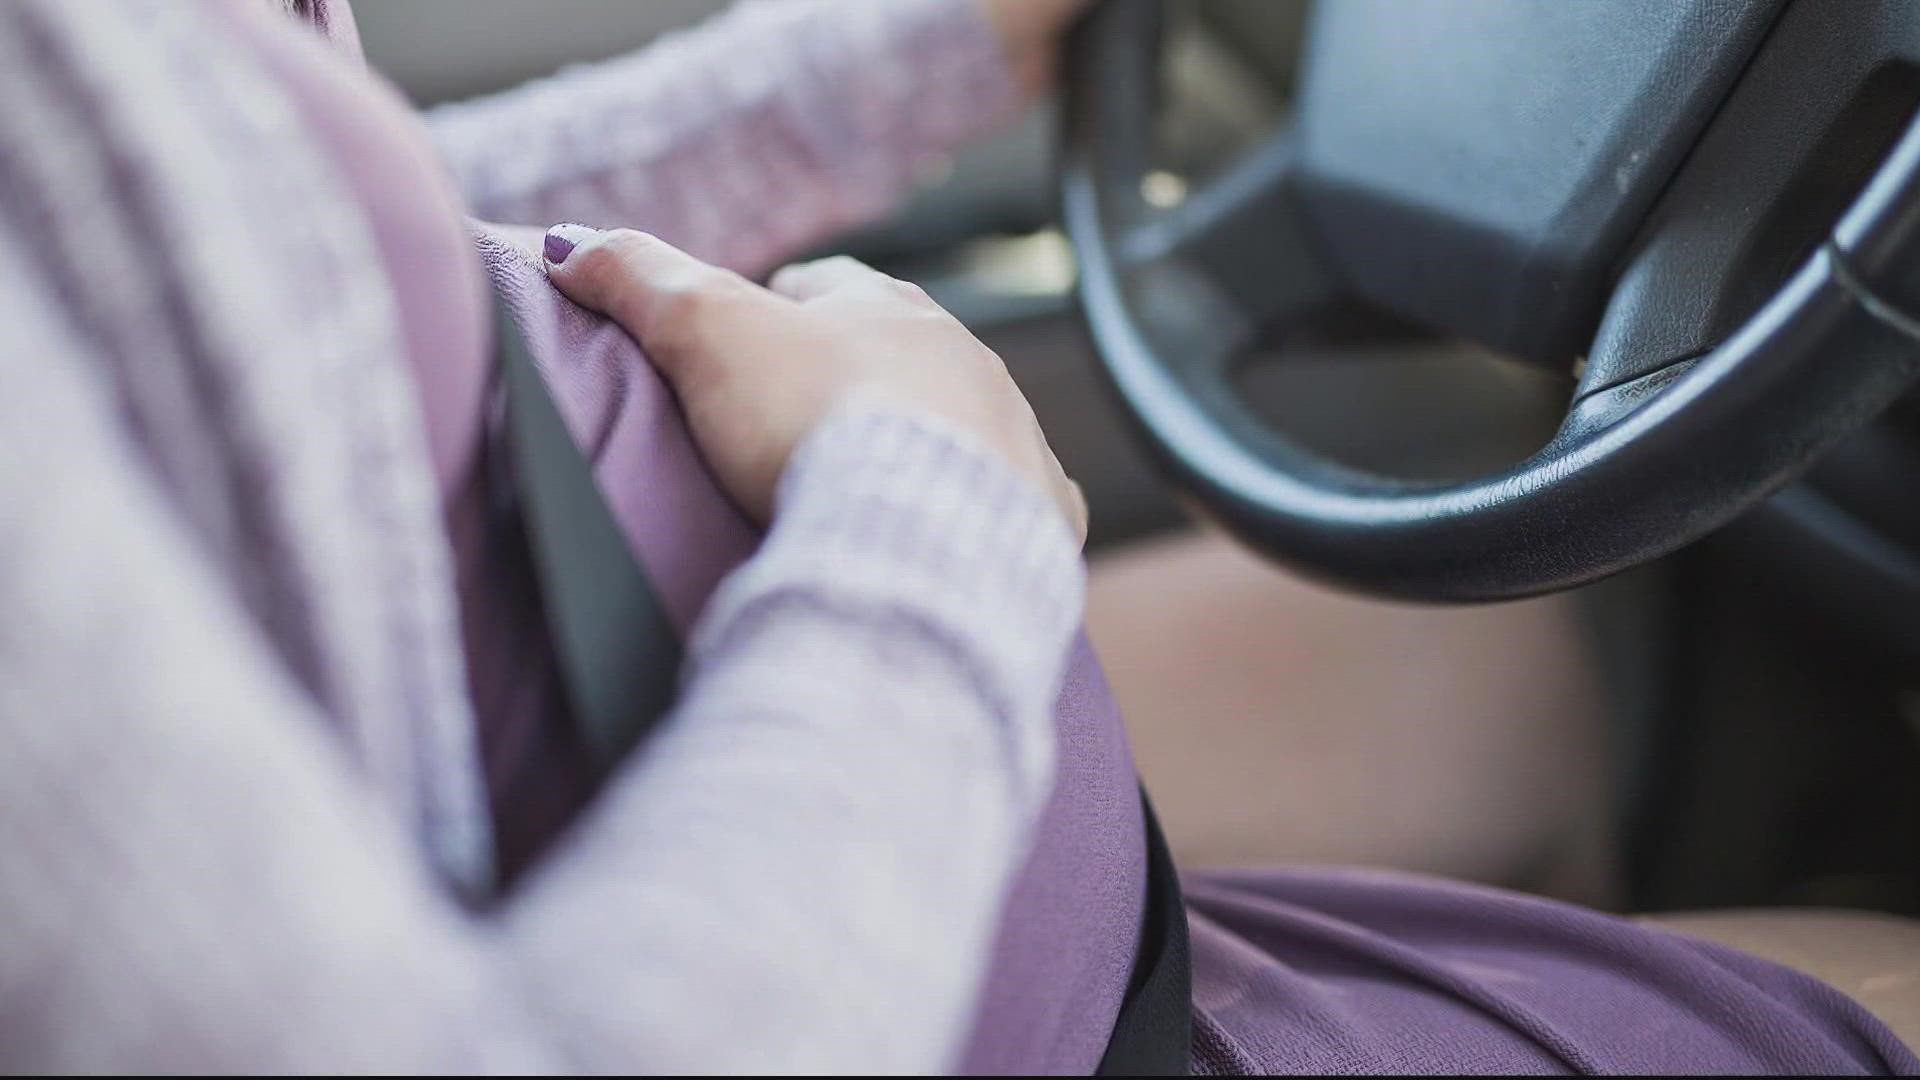 A proposed bill in Virginia would allow a pregnant woman's fetus to count as a person when traveling in a car, which would therefore allow them to use HOV lane.